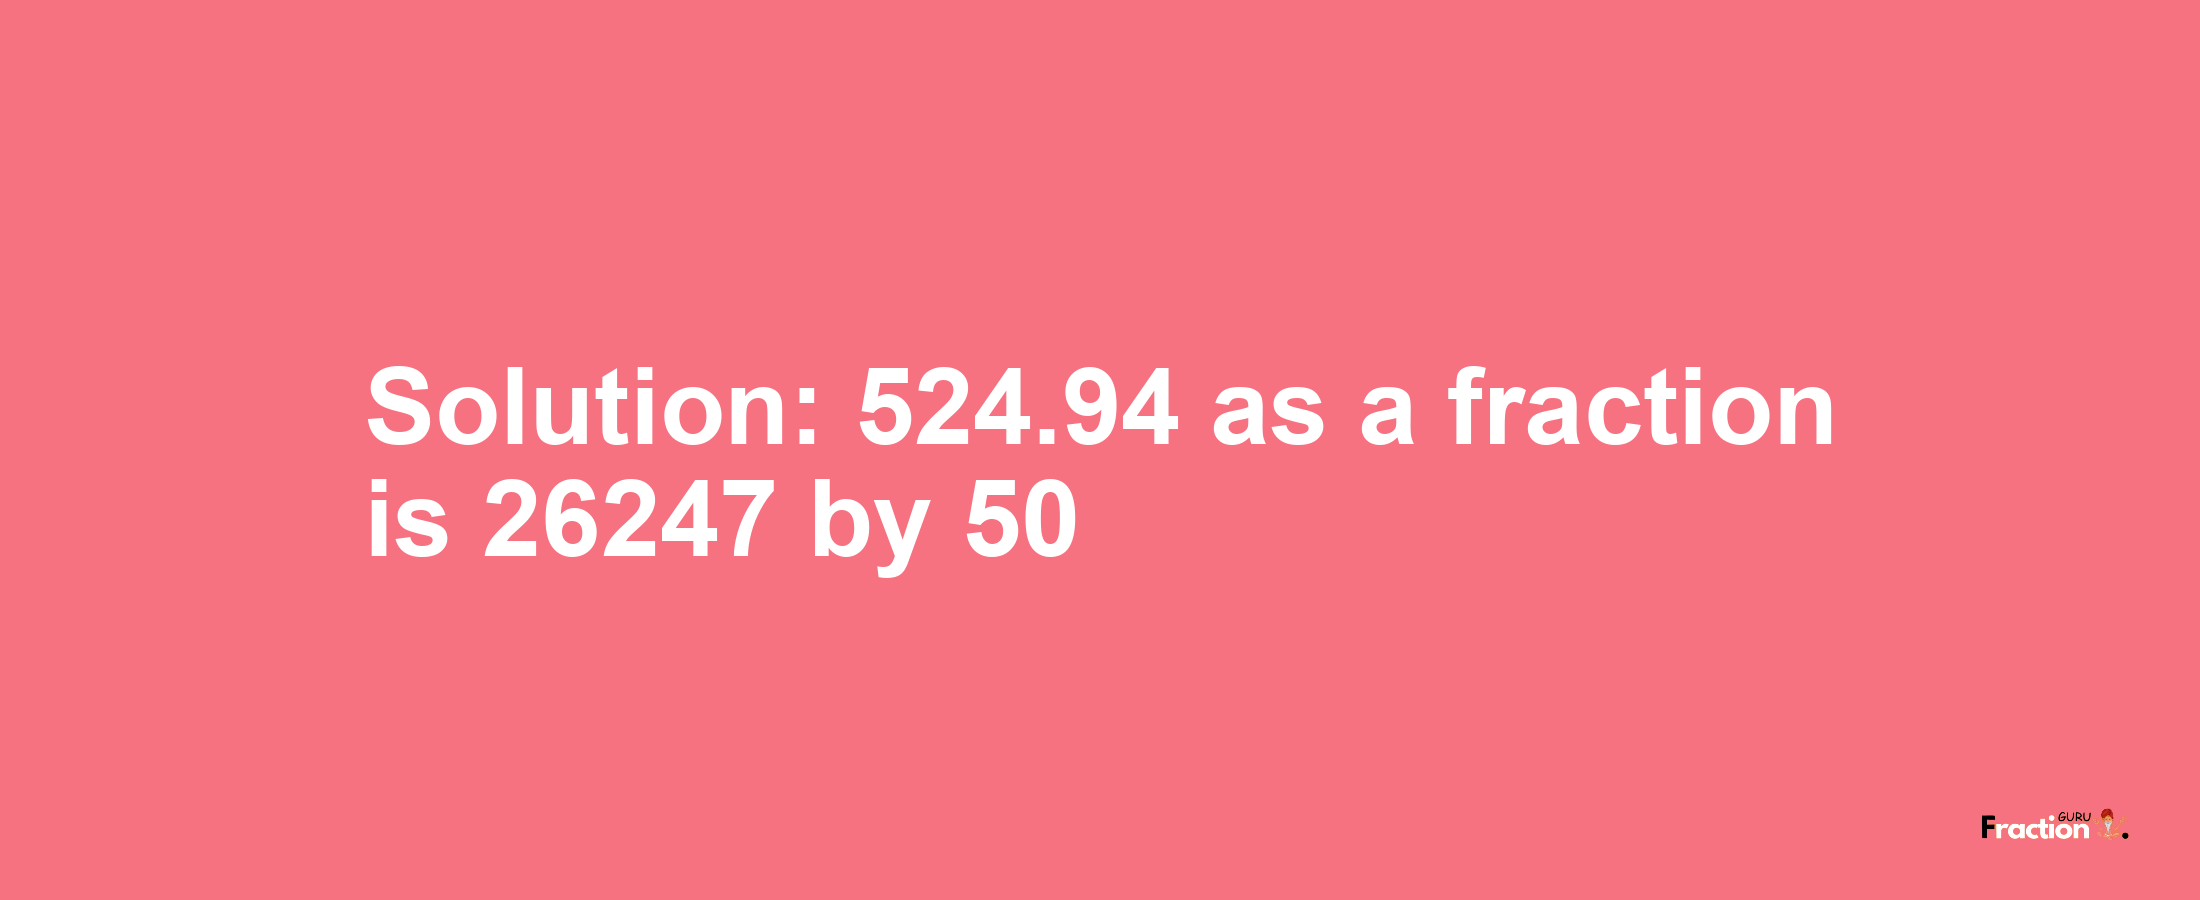 Solution:524.94 as a fraction is 26247/50